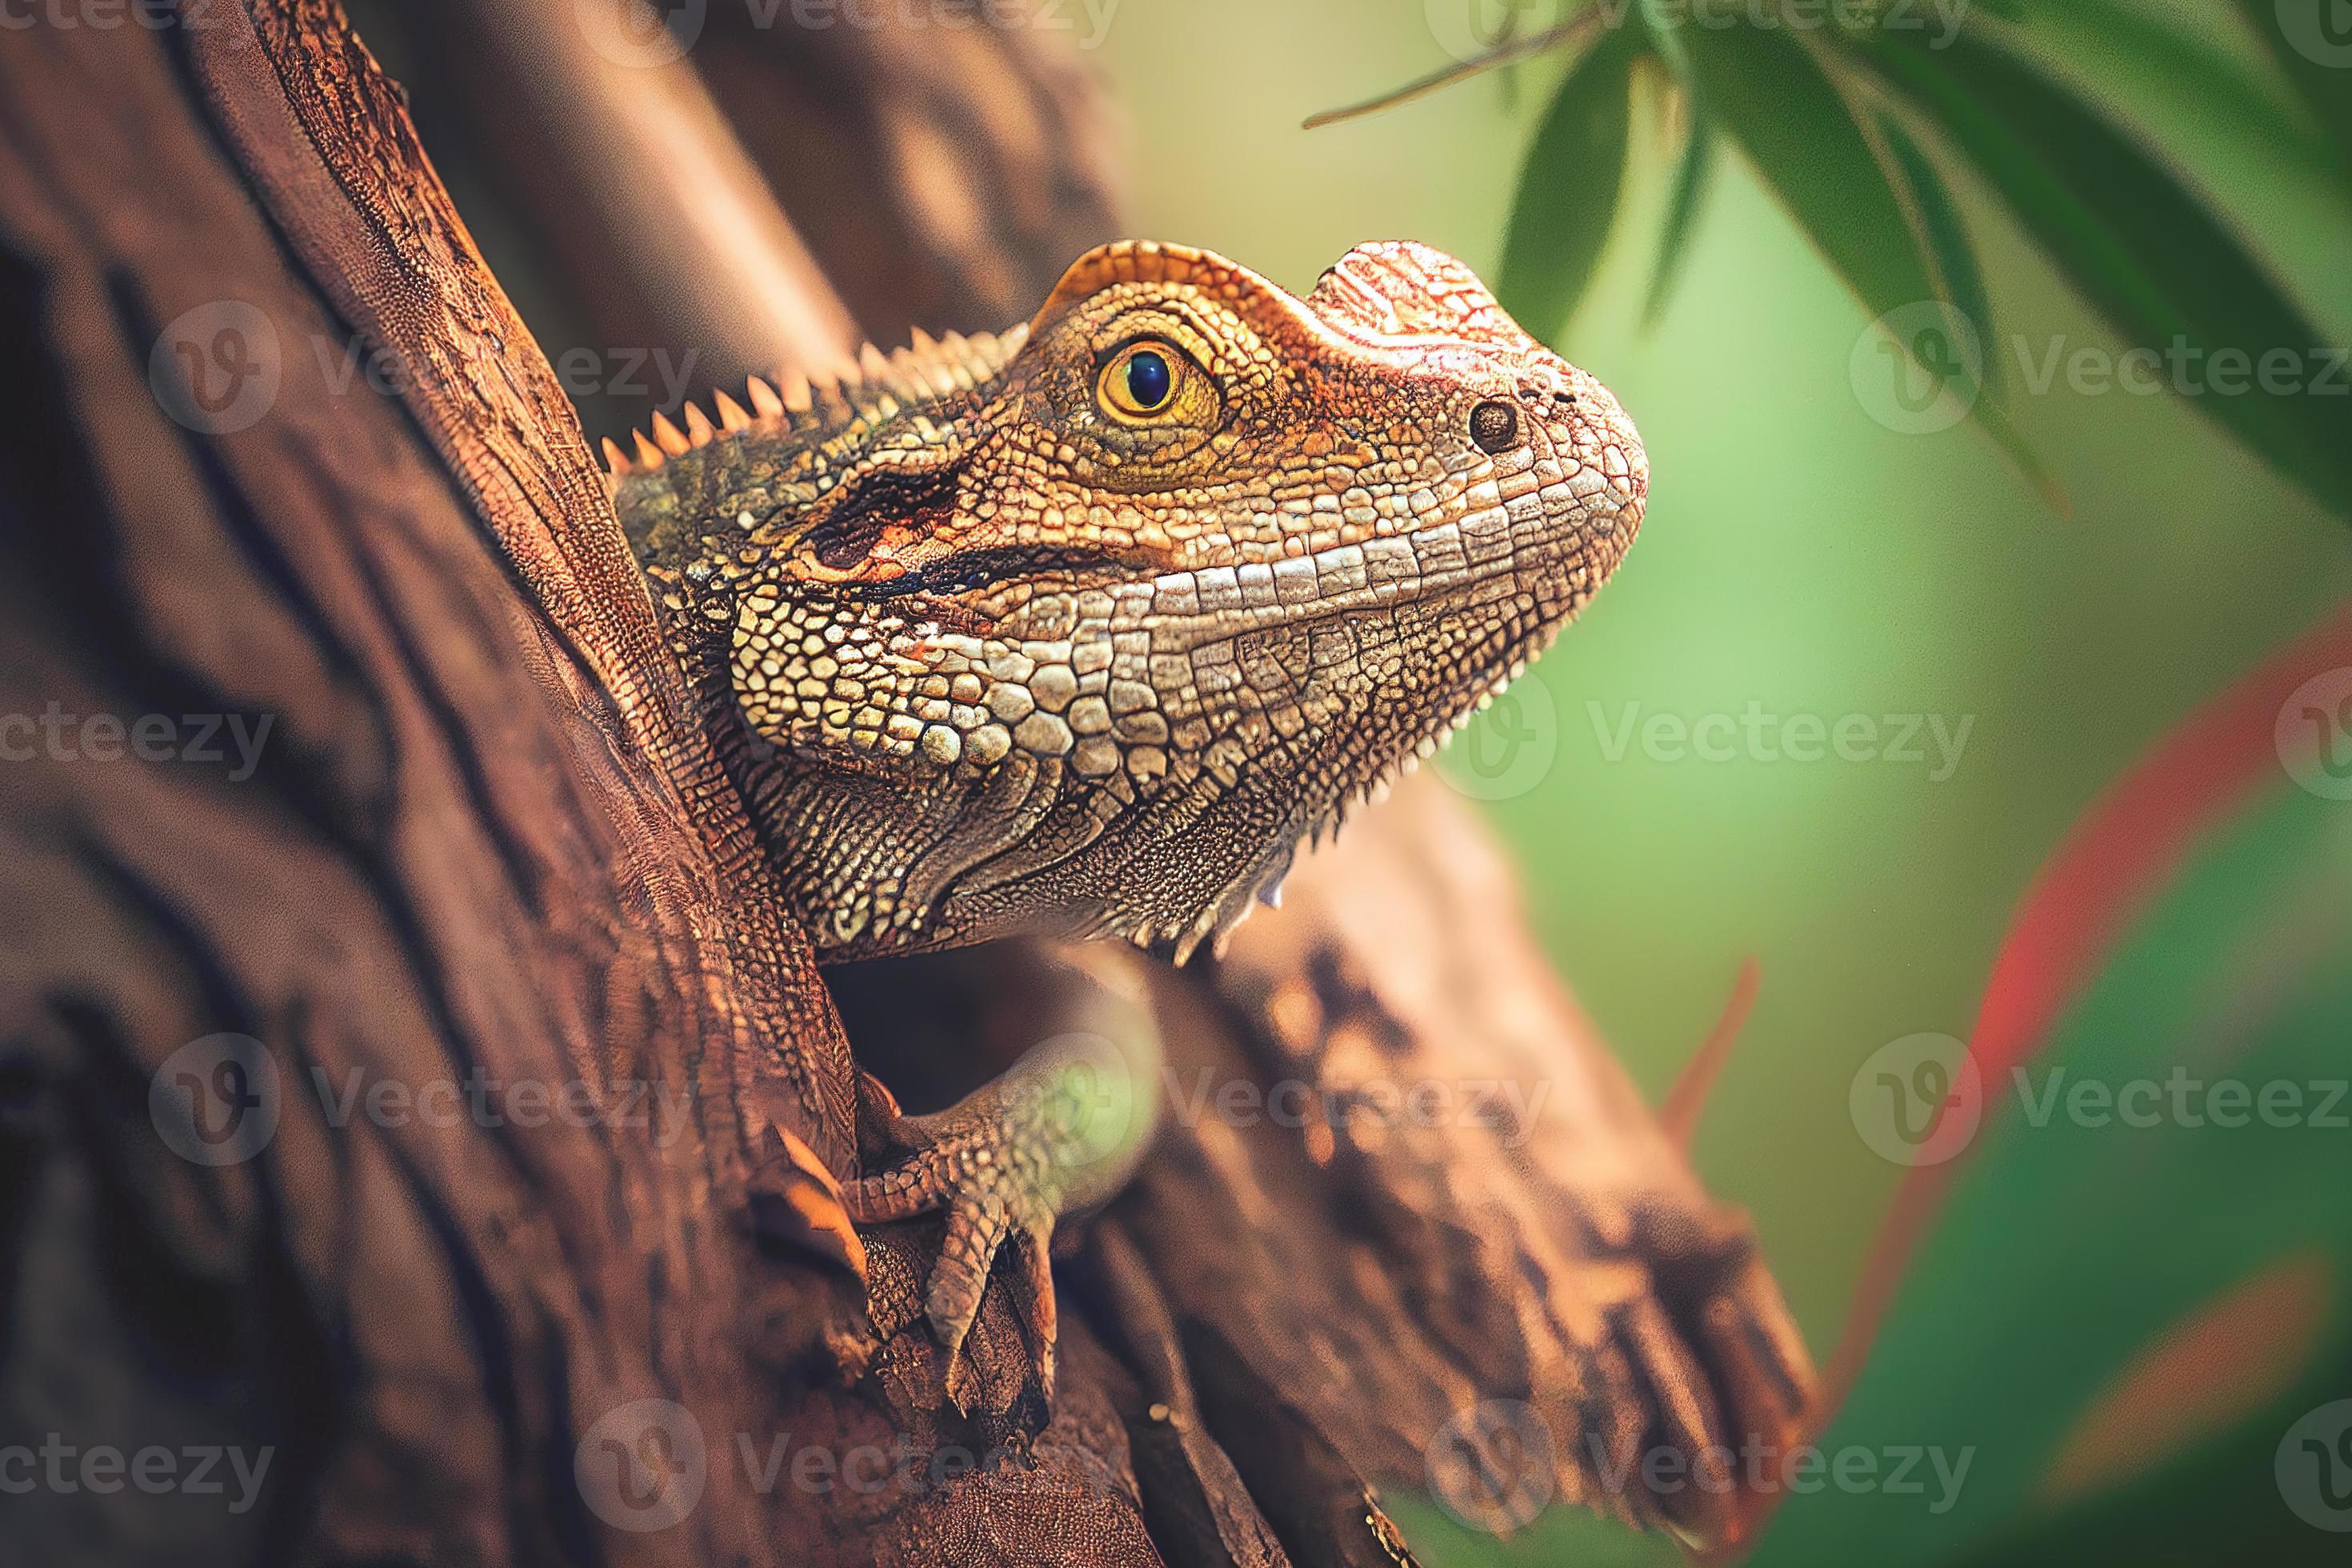 Reptile Wallpapers HD Reptile Backgrounds Free Images Download